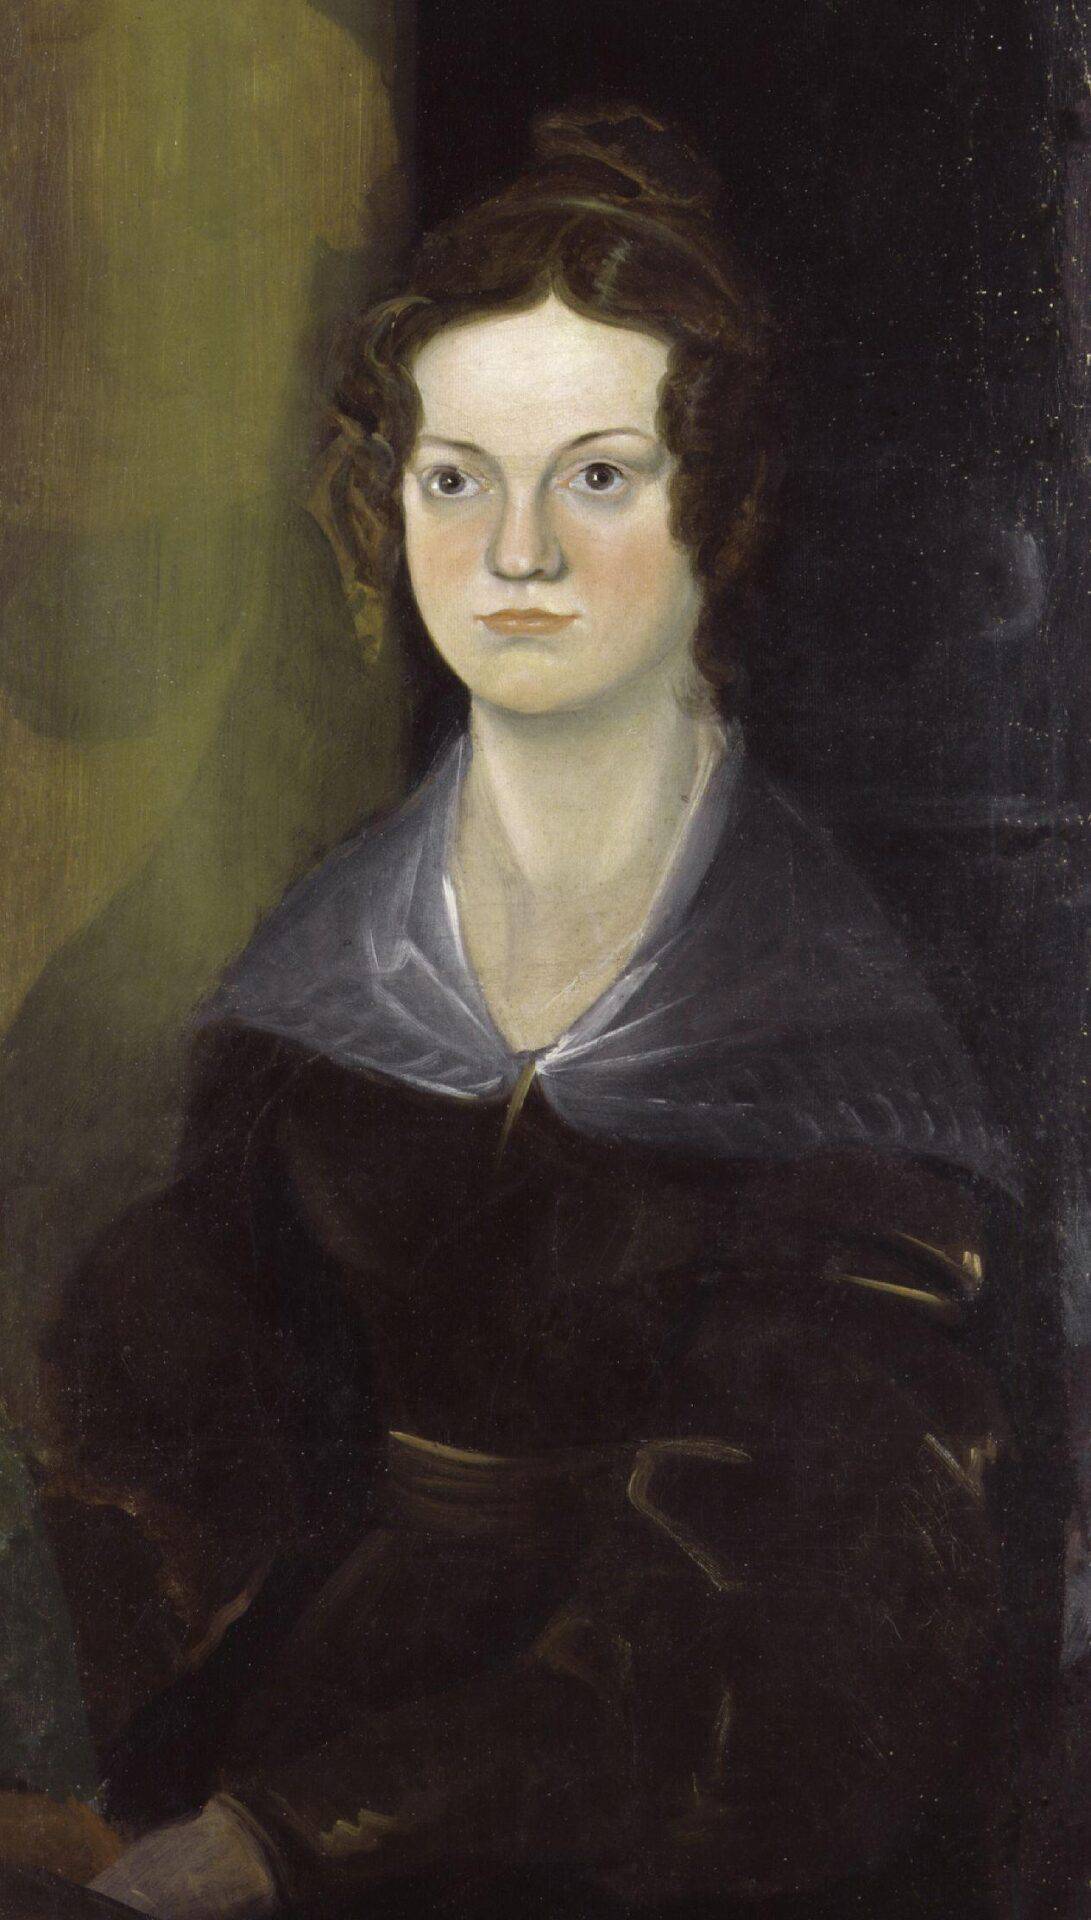 Charlotte Bronte faced controversies